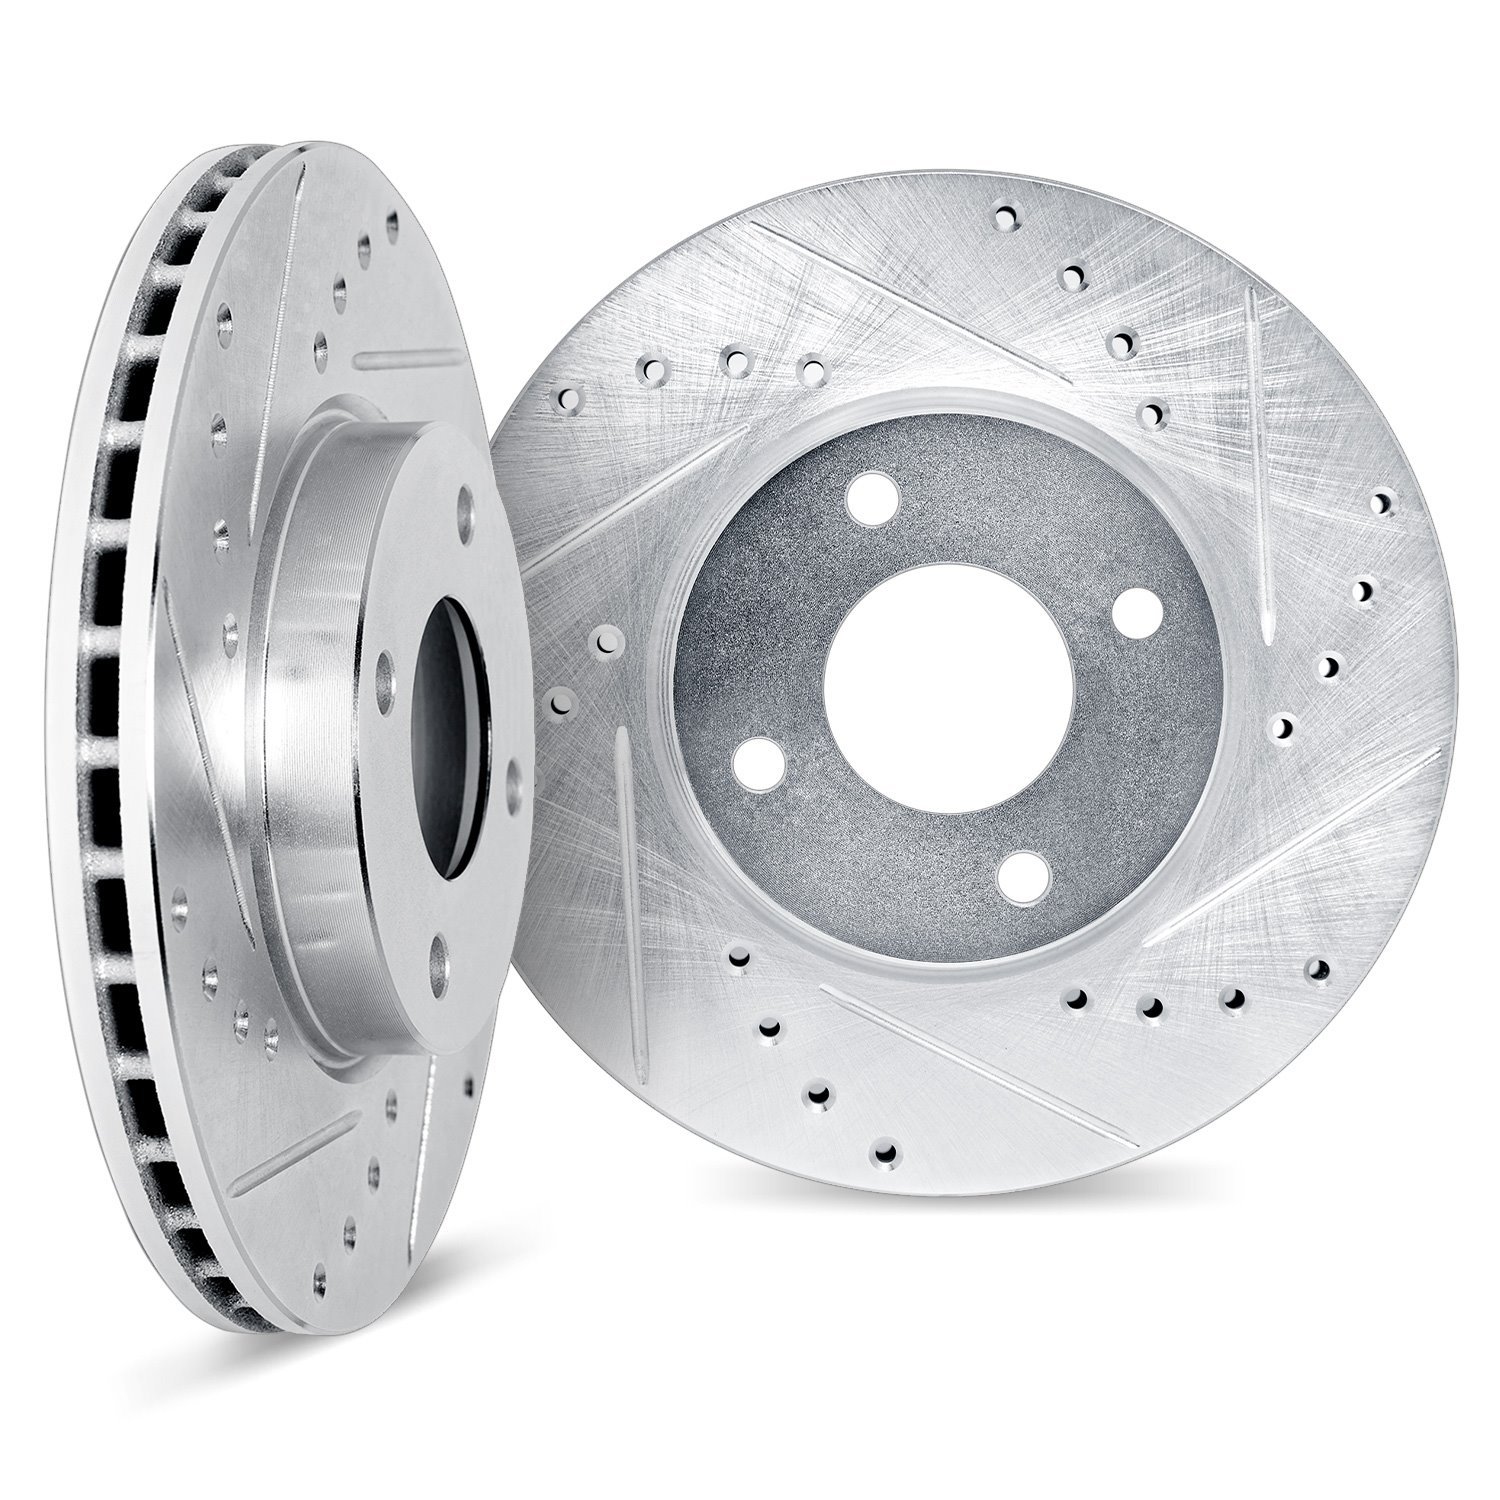 7002-01004 Drilled/Slotted Brake Rotors [Silver], 1995-2002 Suzuki, Position: Front